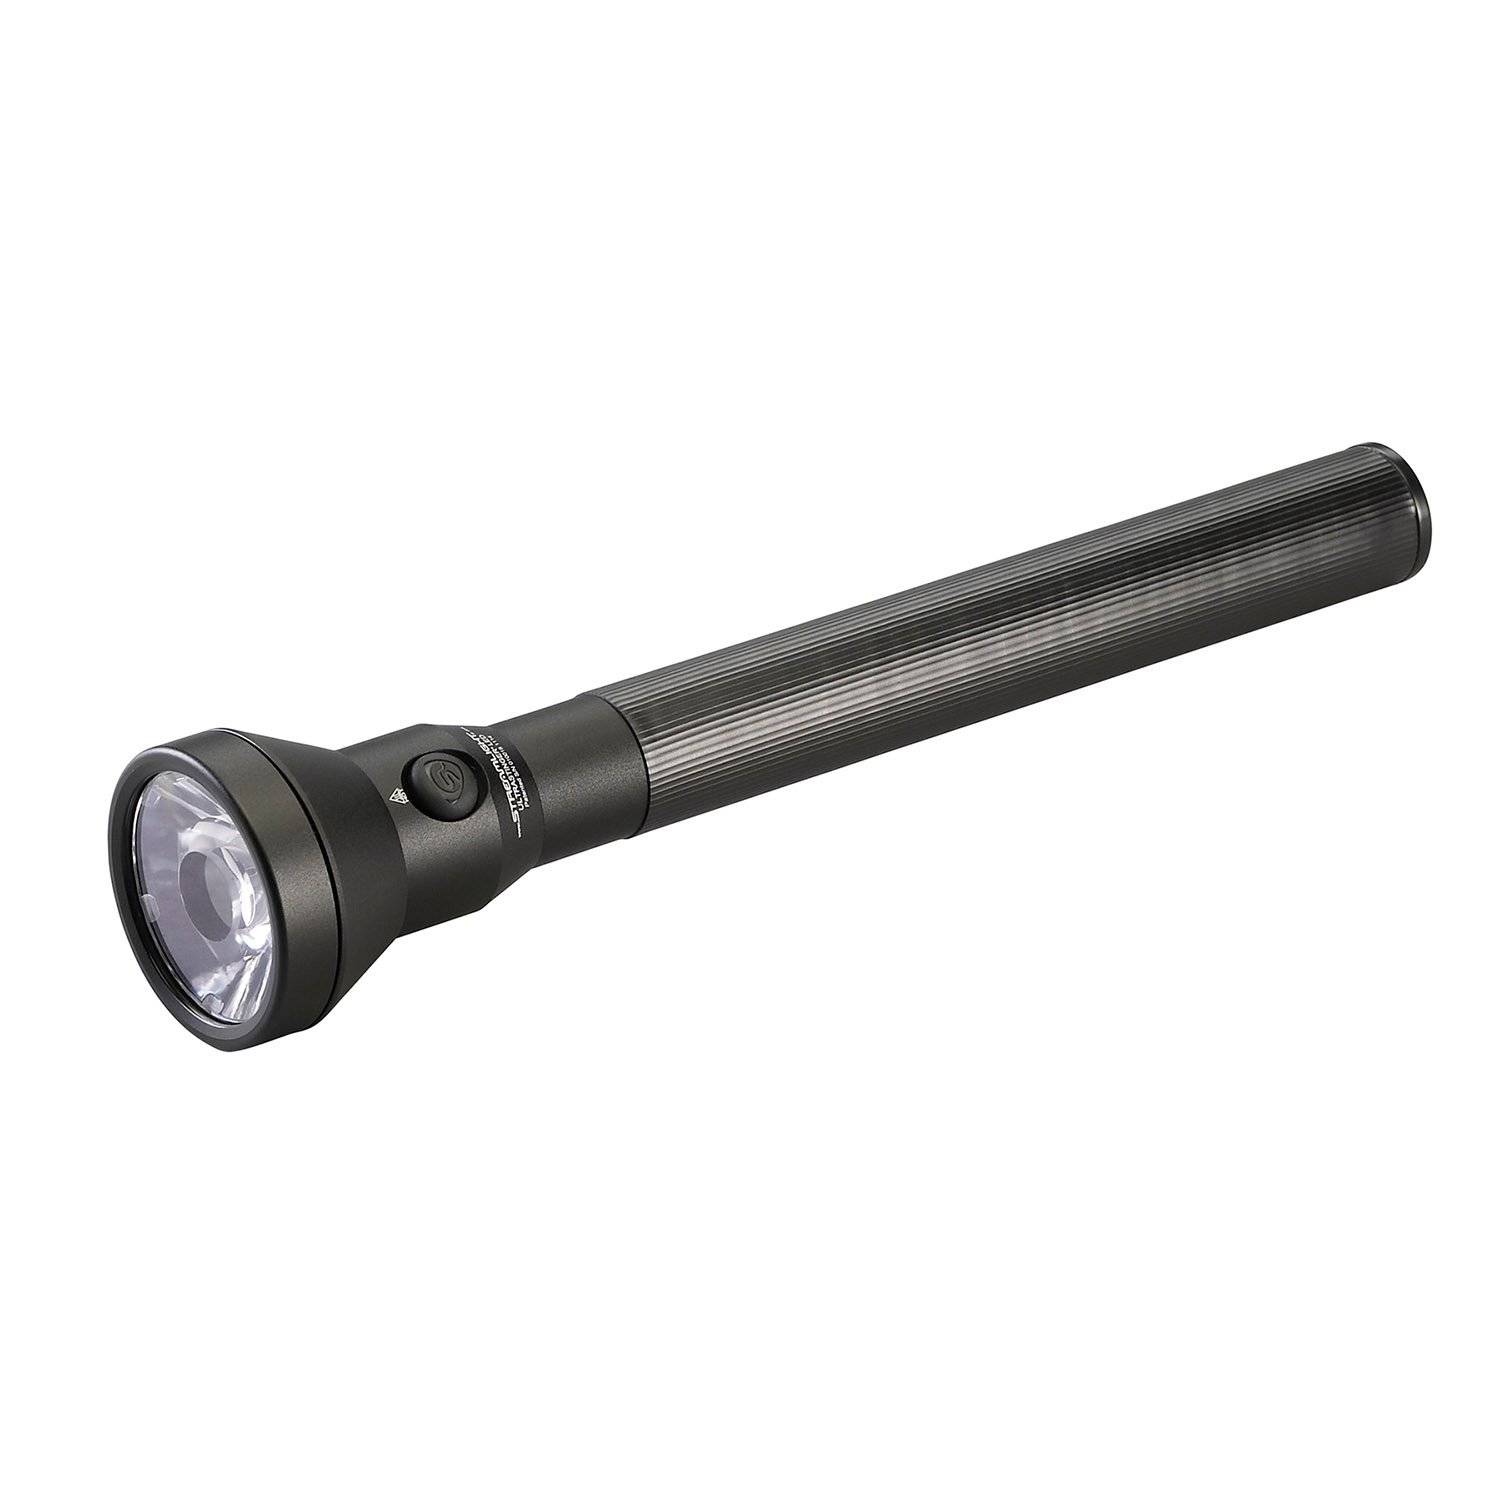 Streamlight UltraStinger LED Rechargeable Flashlight with Ch